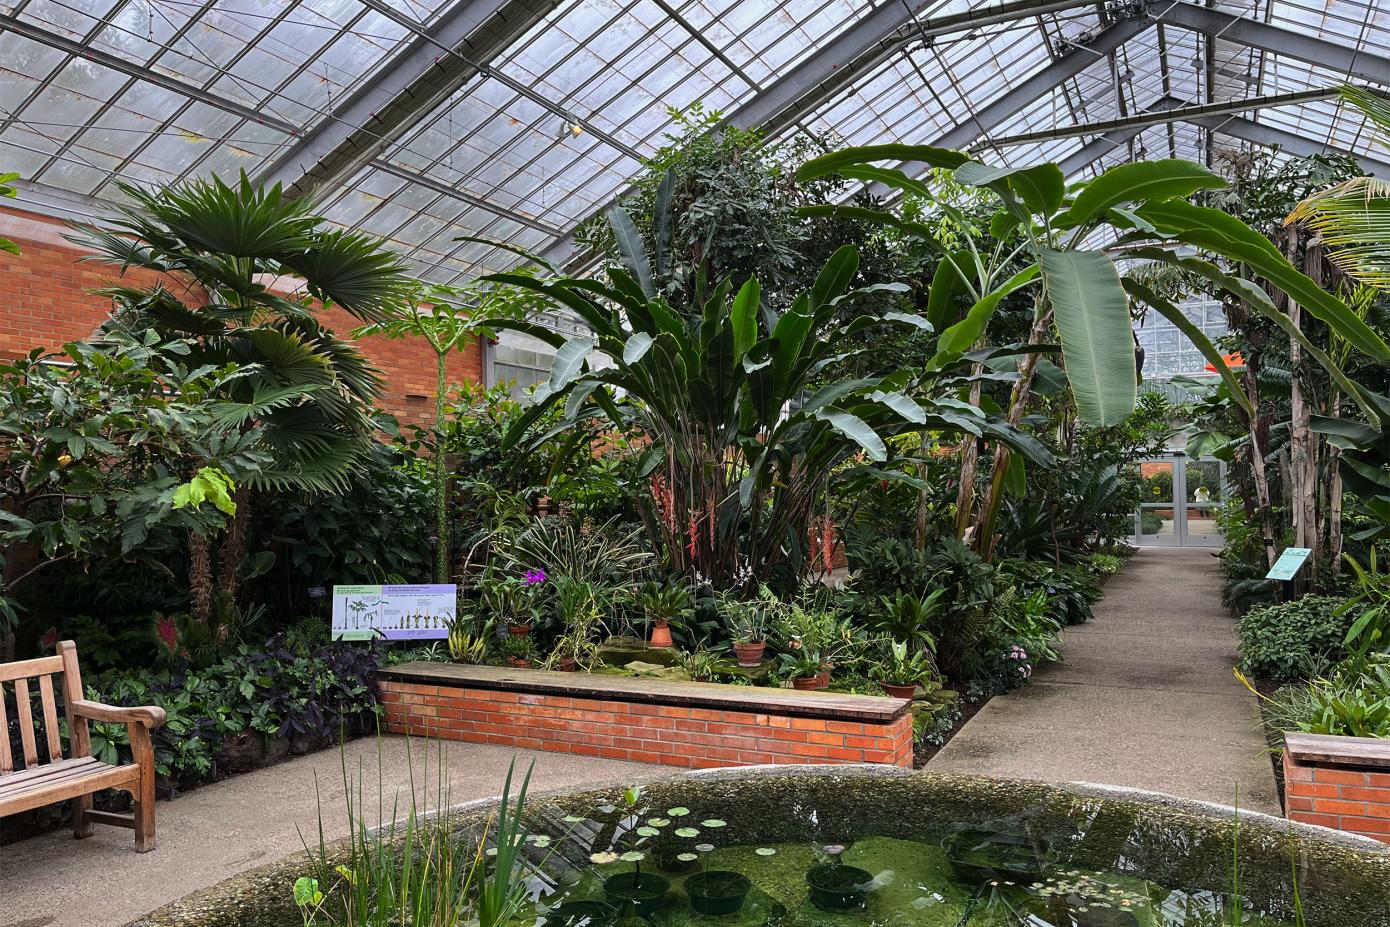 A view of the tropical house